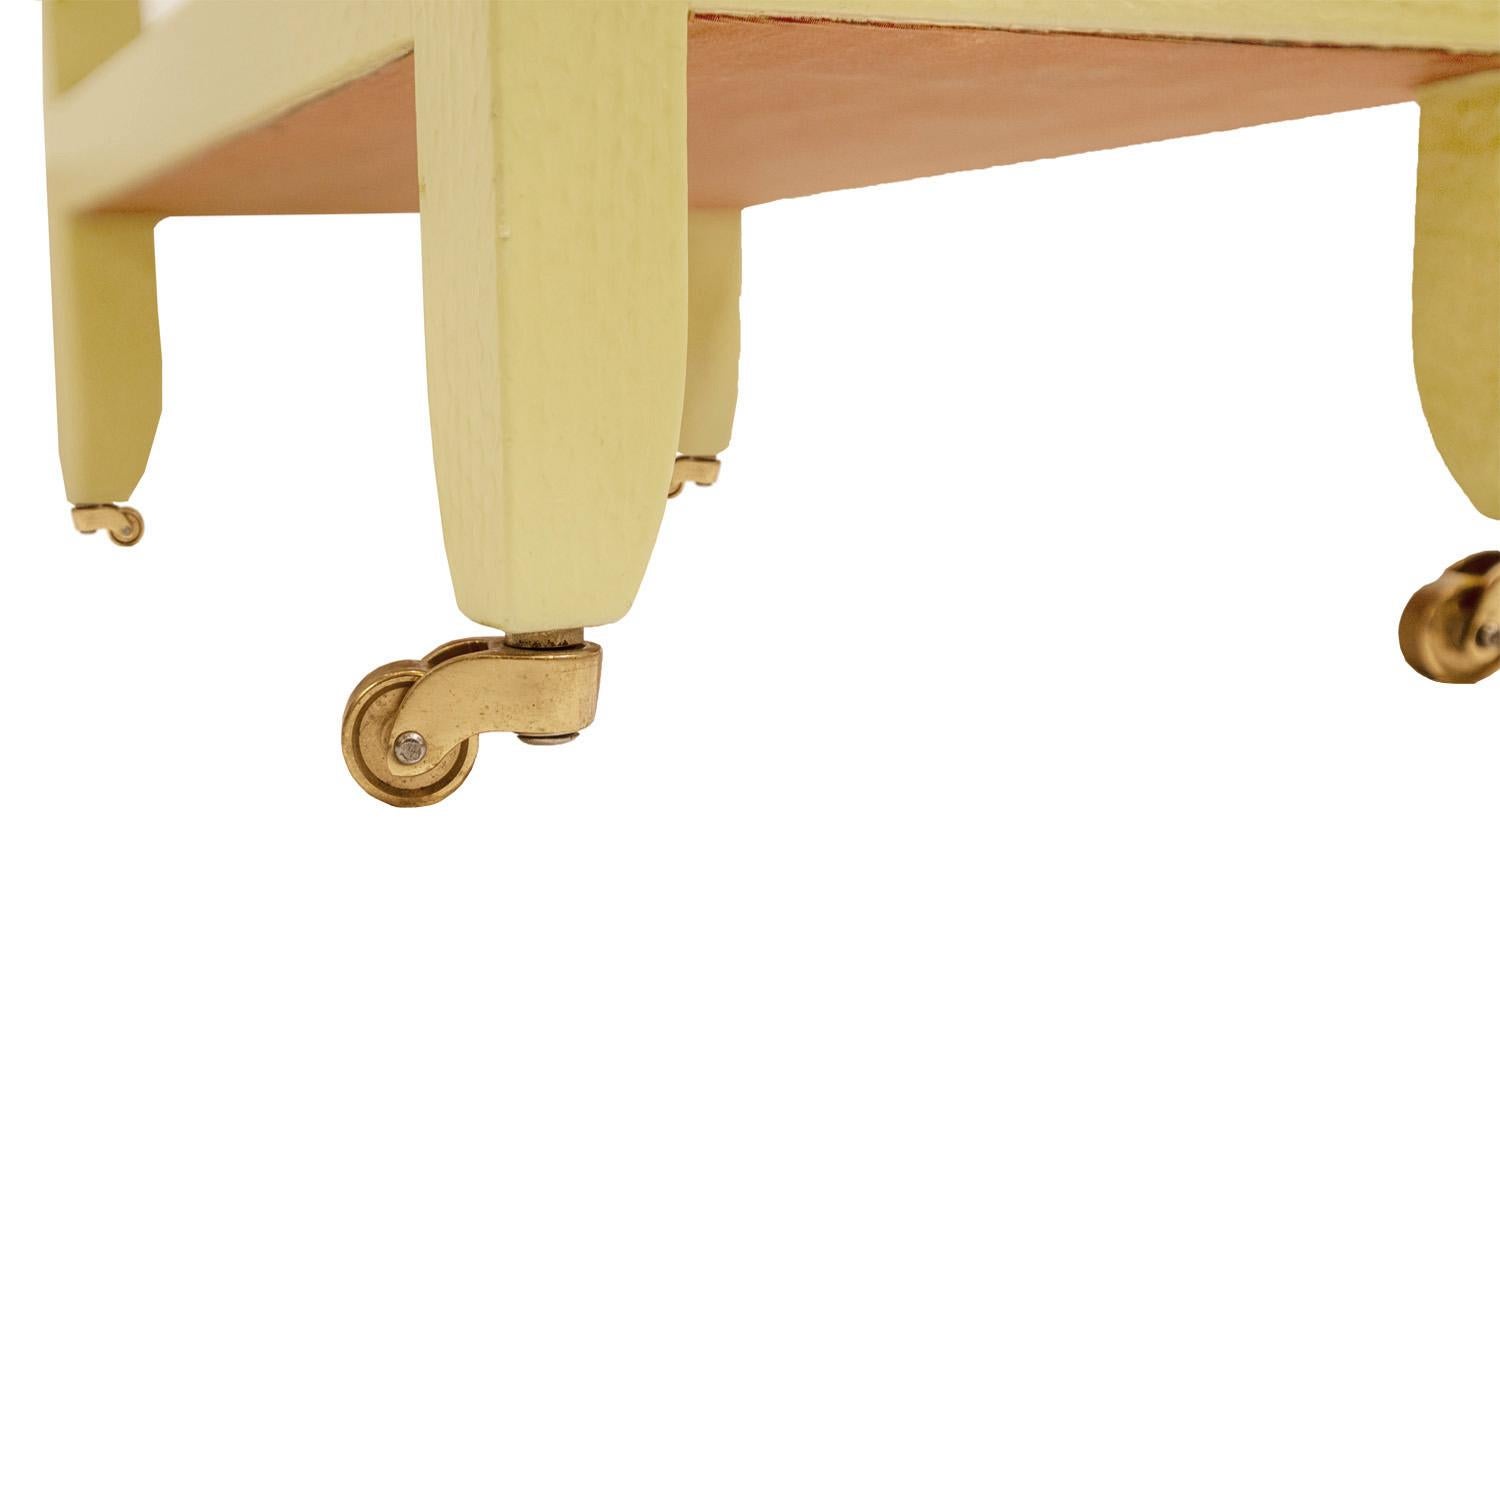 Hand-Crafted Karl Springer Telephone Table in Yellow Cobra with Brass Castors 1985, 'Signed' For Sale